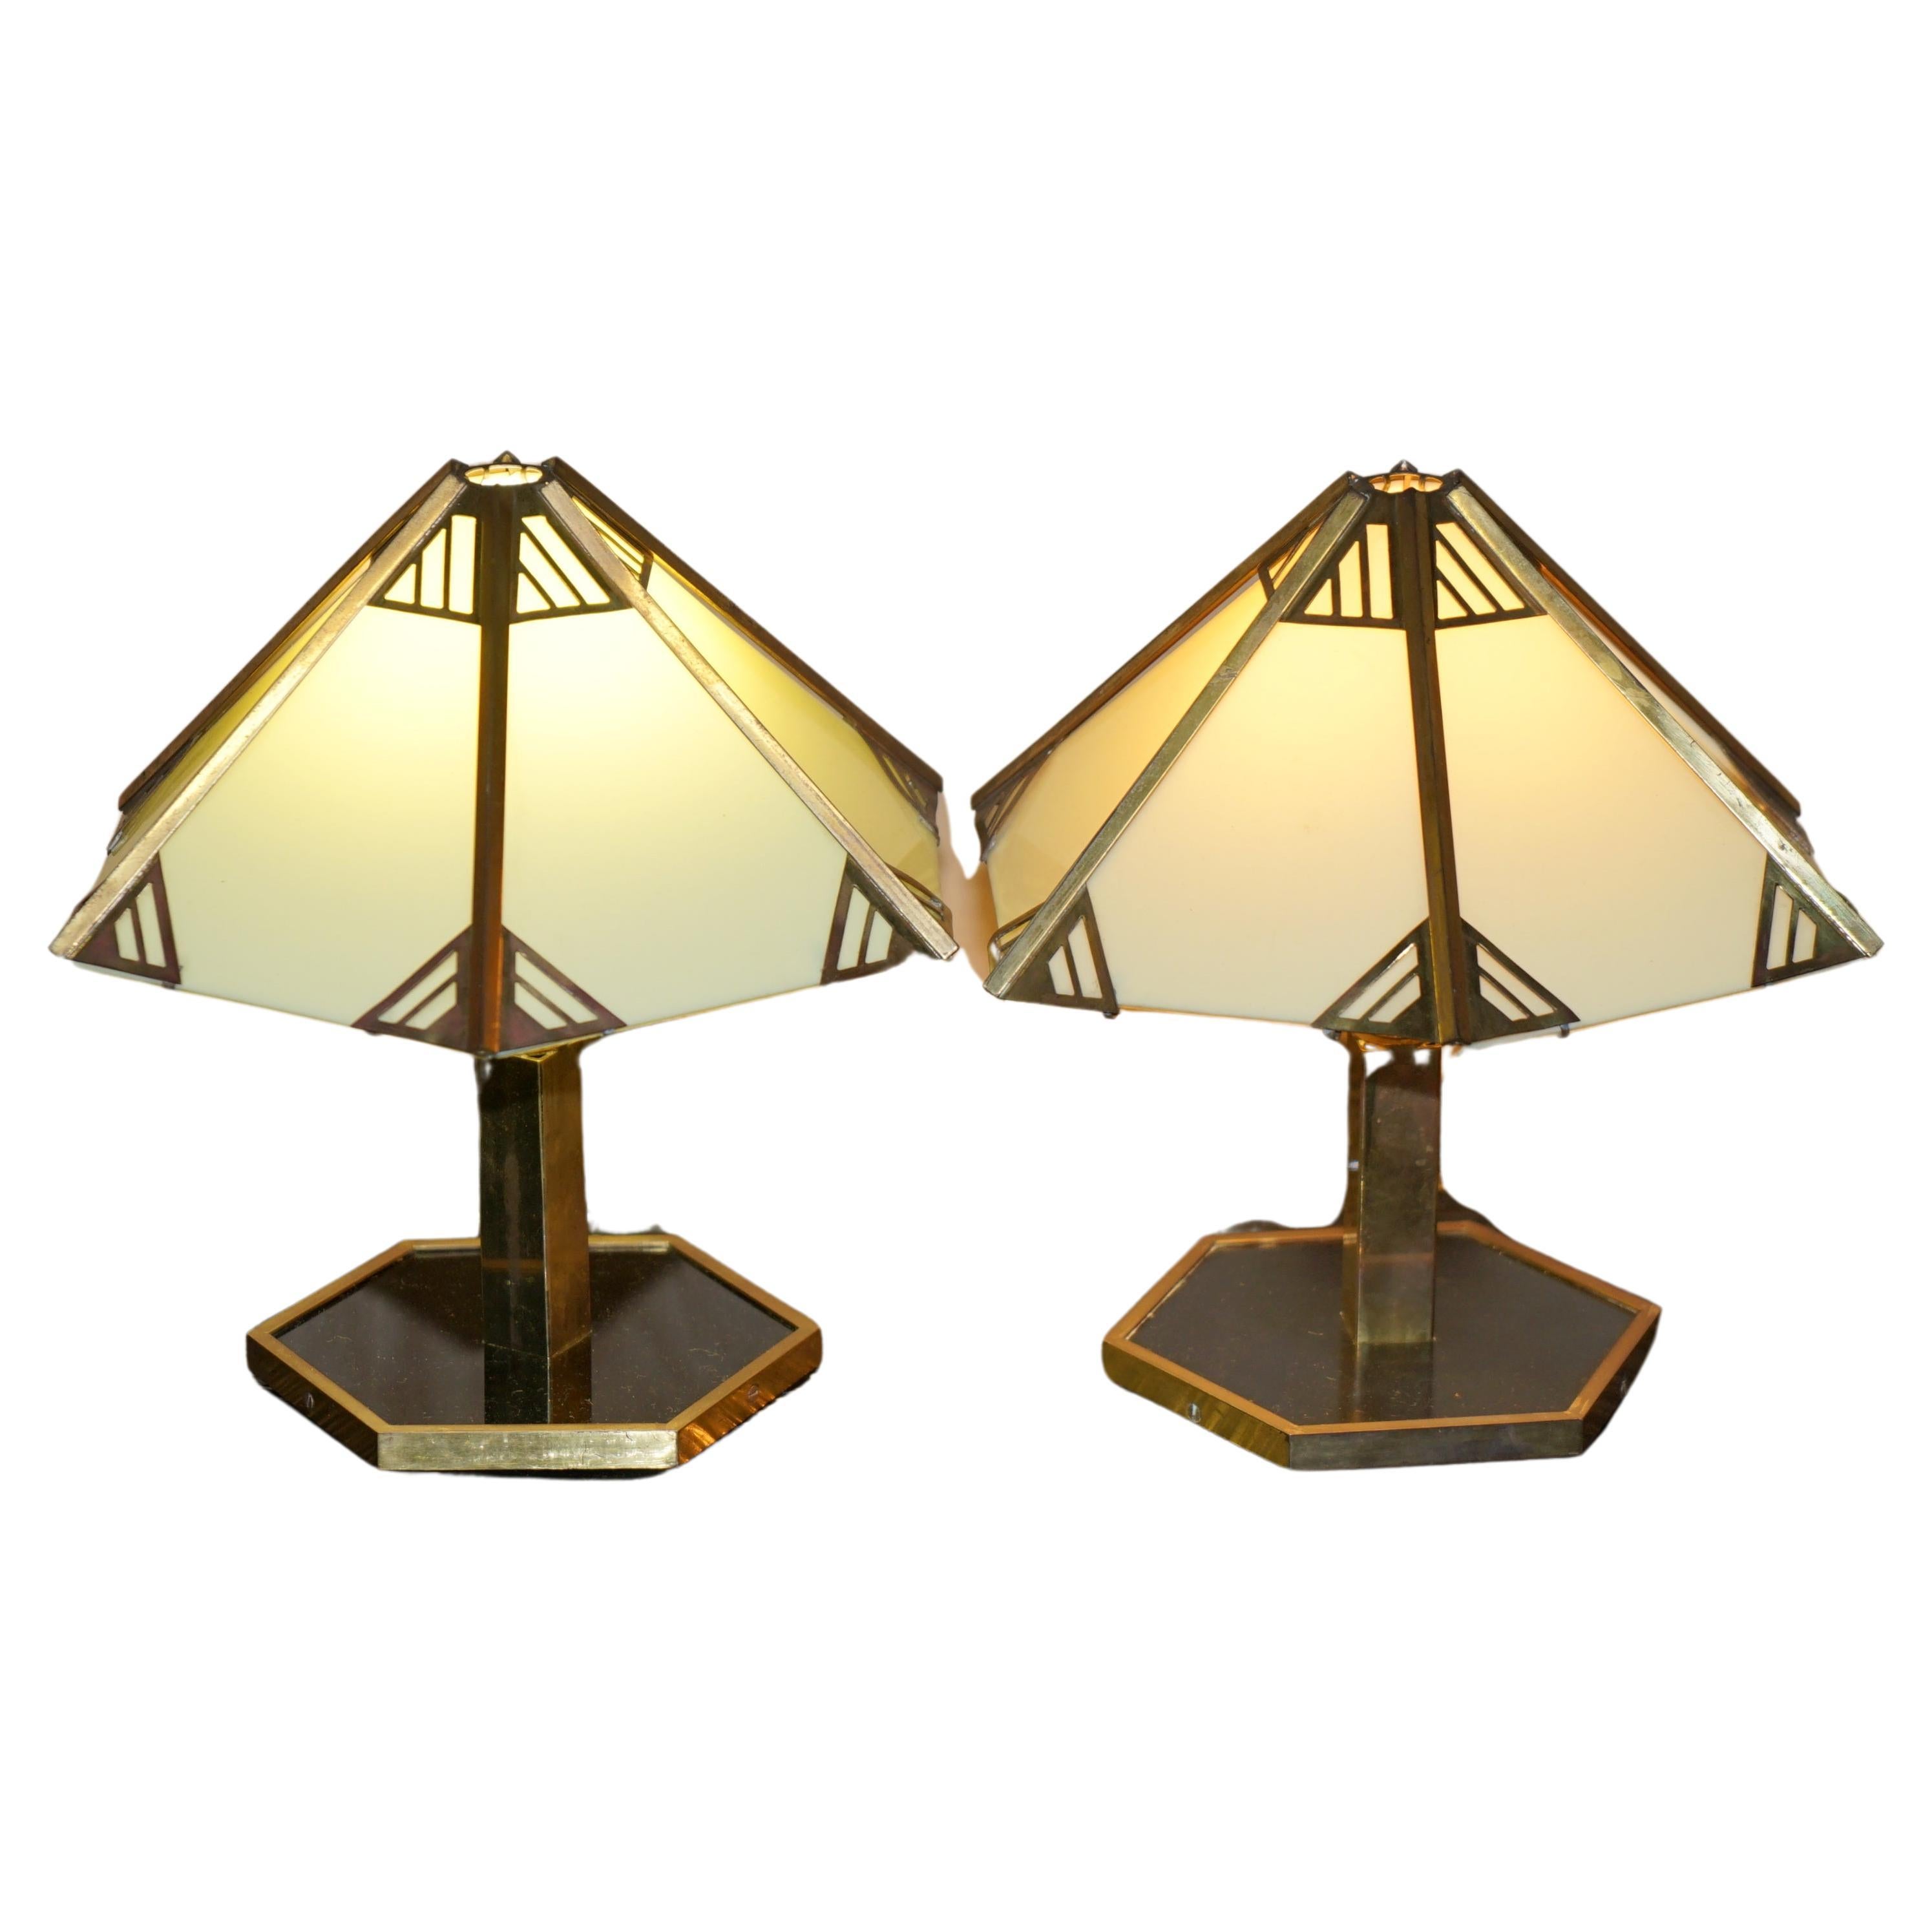 STUNNING PAIR OF ITALIAN CIRCA 1930'S BRASS & LUCITE TABLE LAMPS FULLY RESTOREd